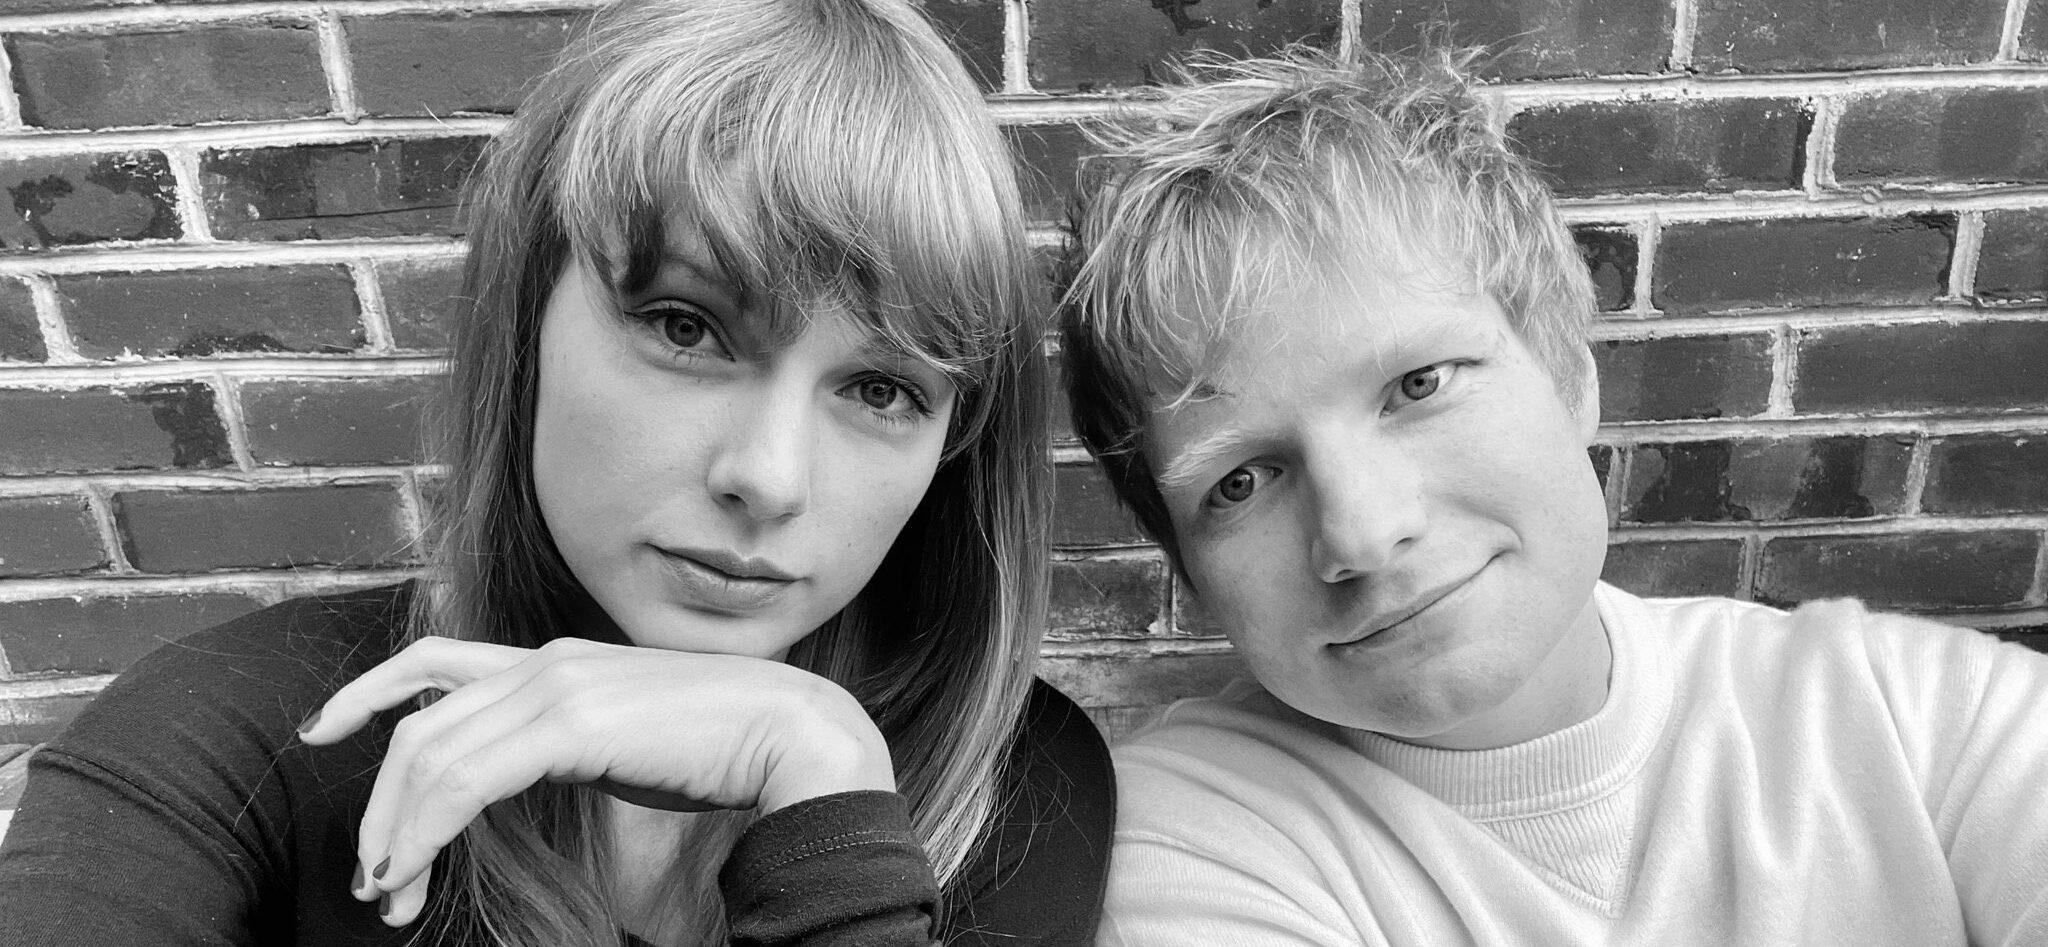 Ed Sheeran Thanks Taylor Swift For Her Role In Creating His New Album